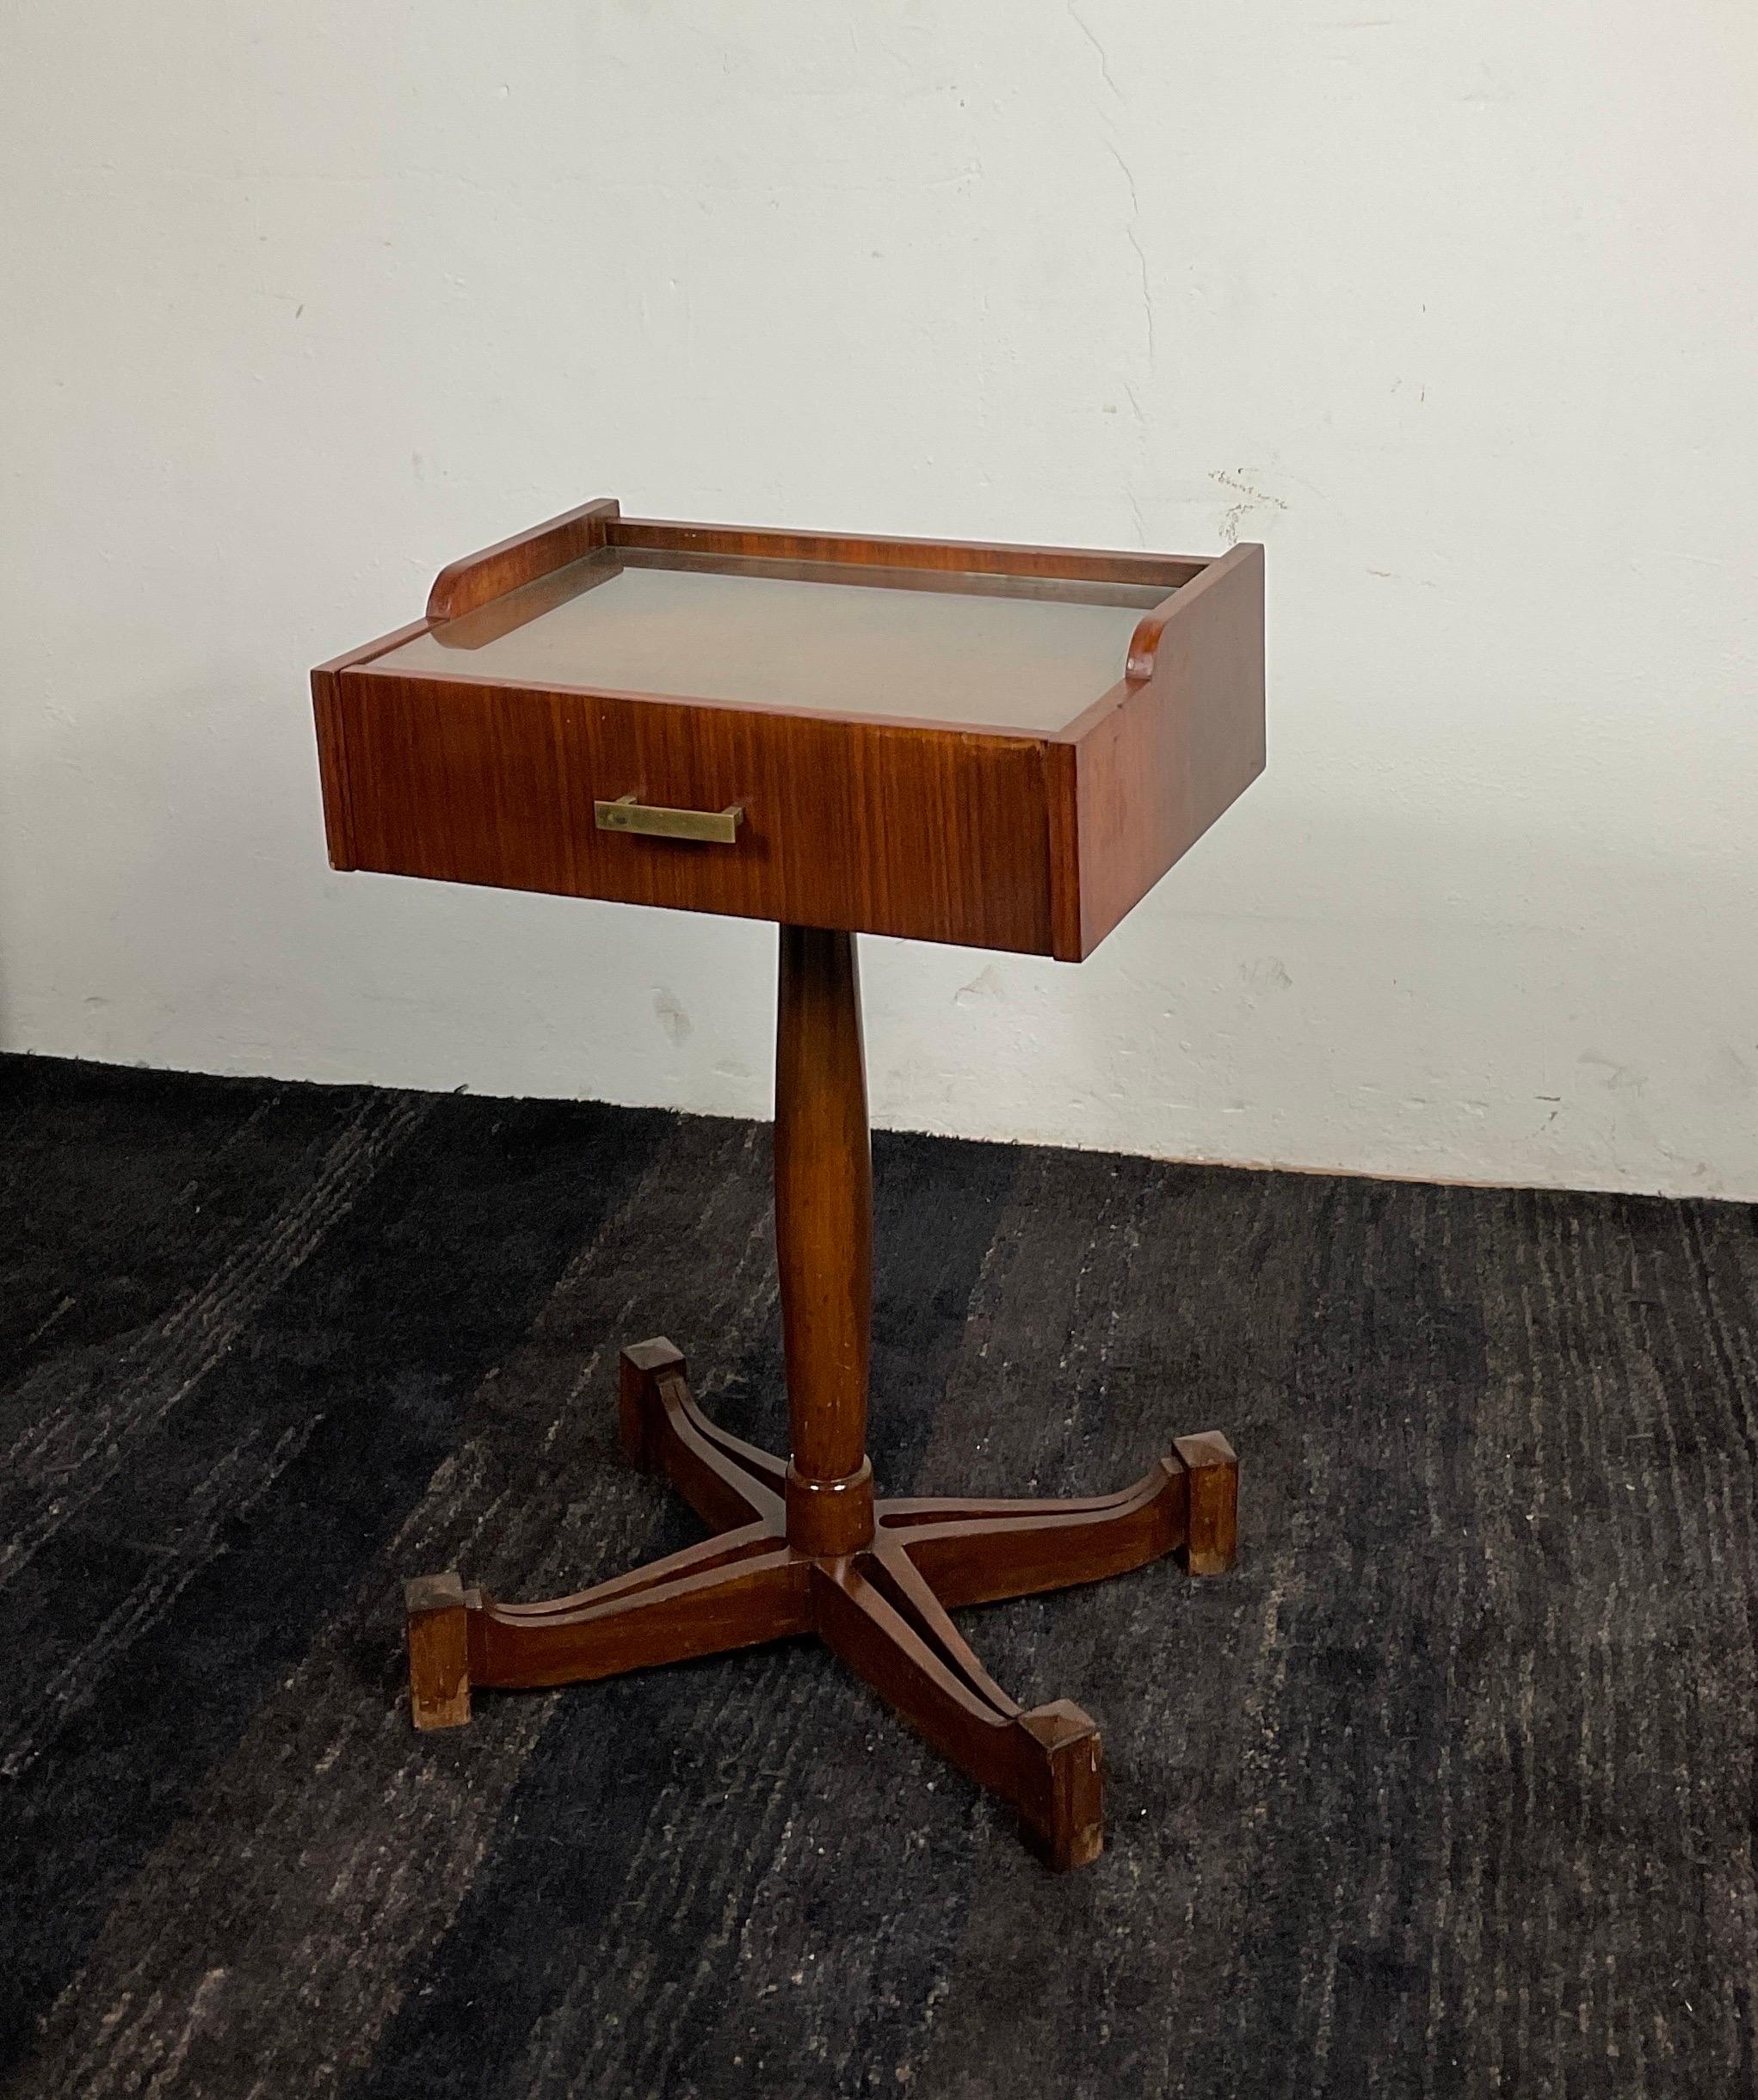 Italian Wooden Nightstand Sc 50 Model by Carlo Salocchi for Sormani 60's, Italy For Sale